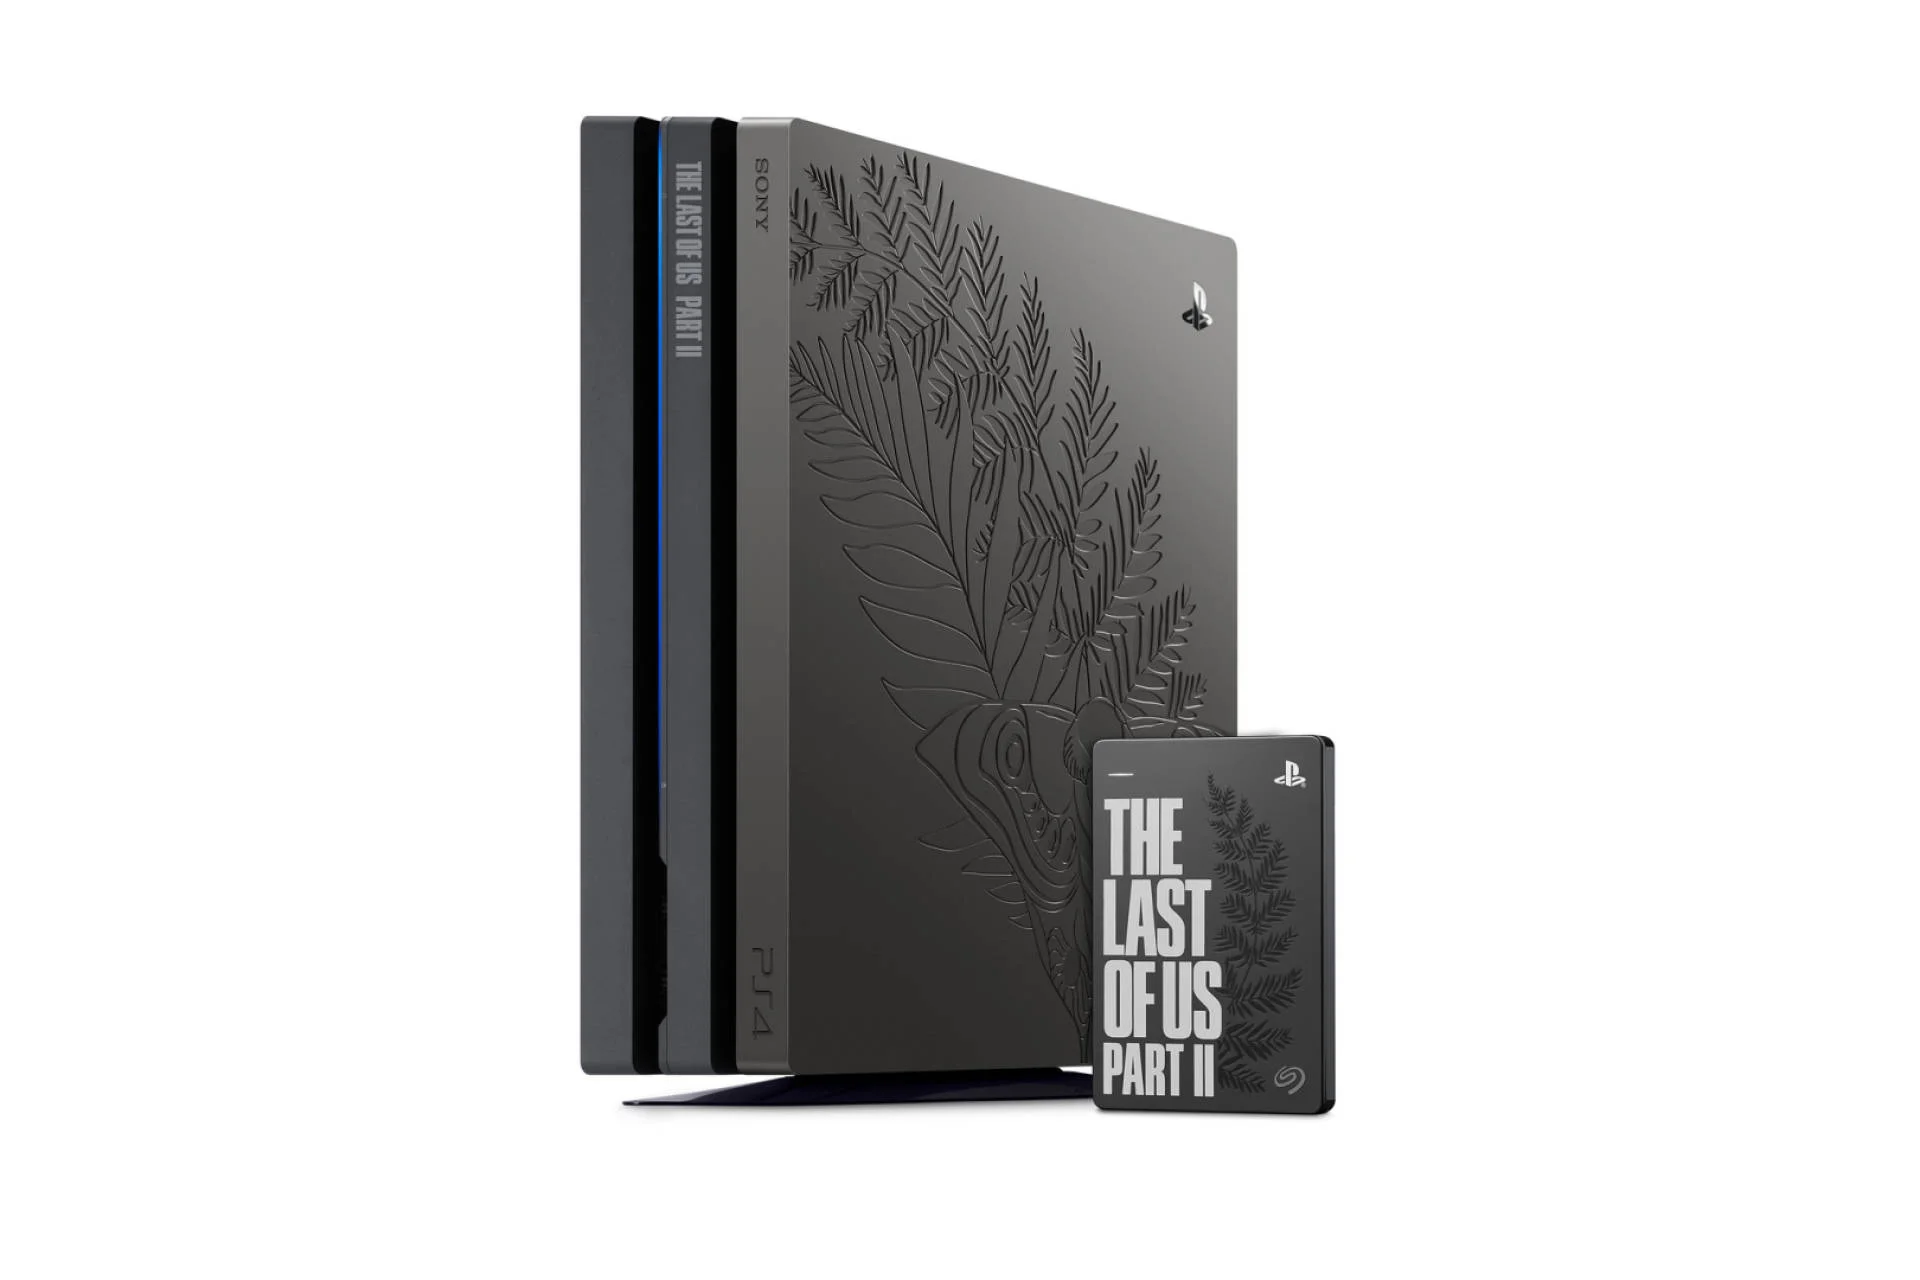  Sony Playstation 4 Pro The Last of Us Part II Console